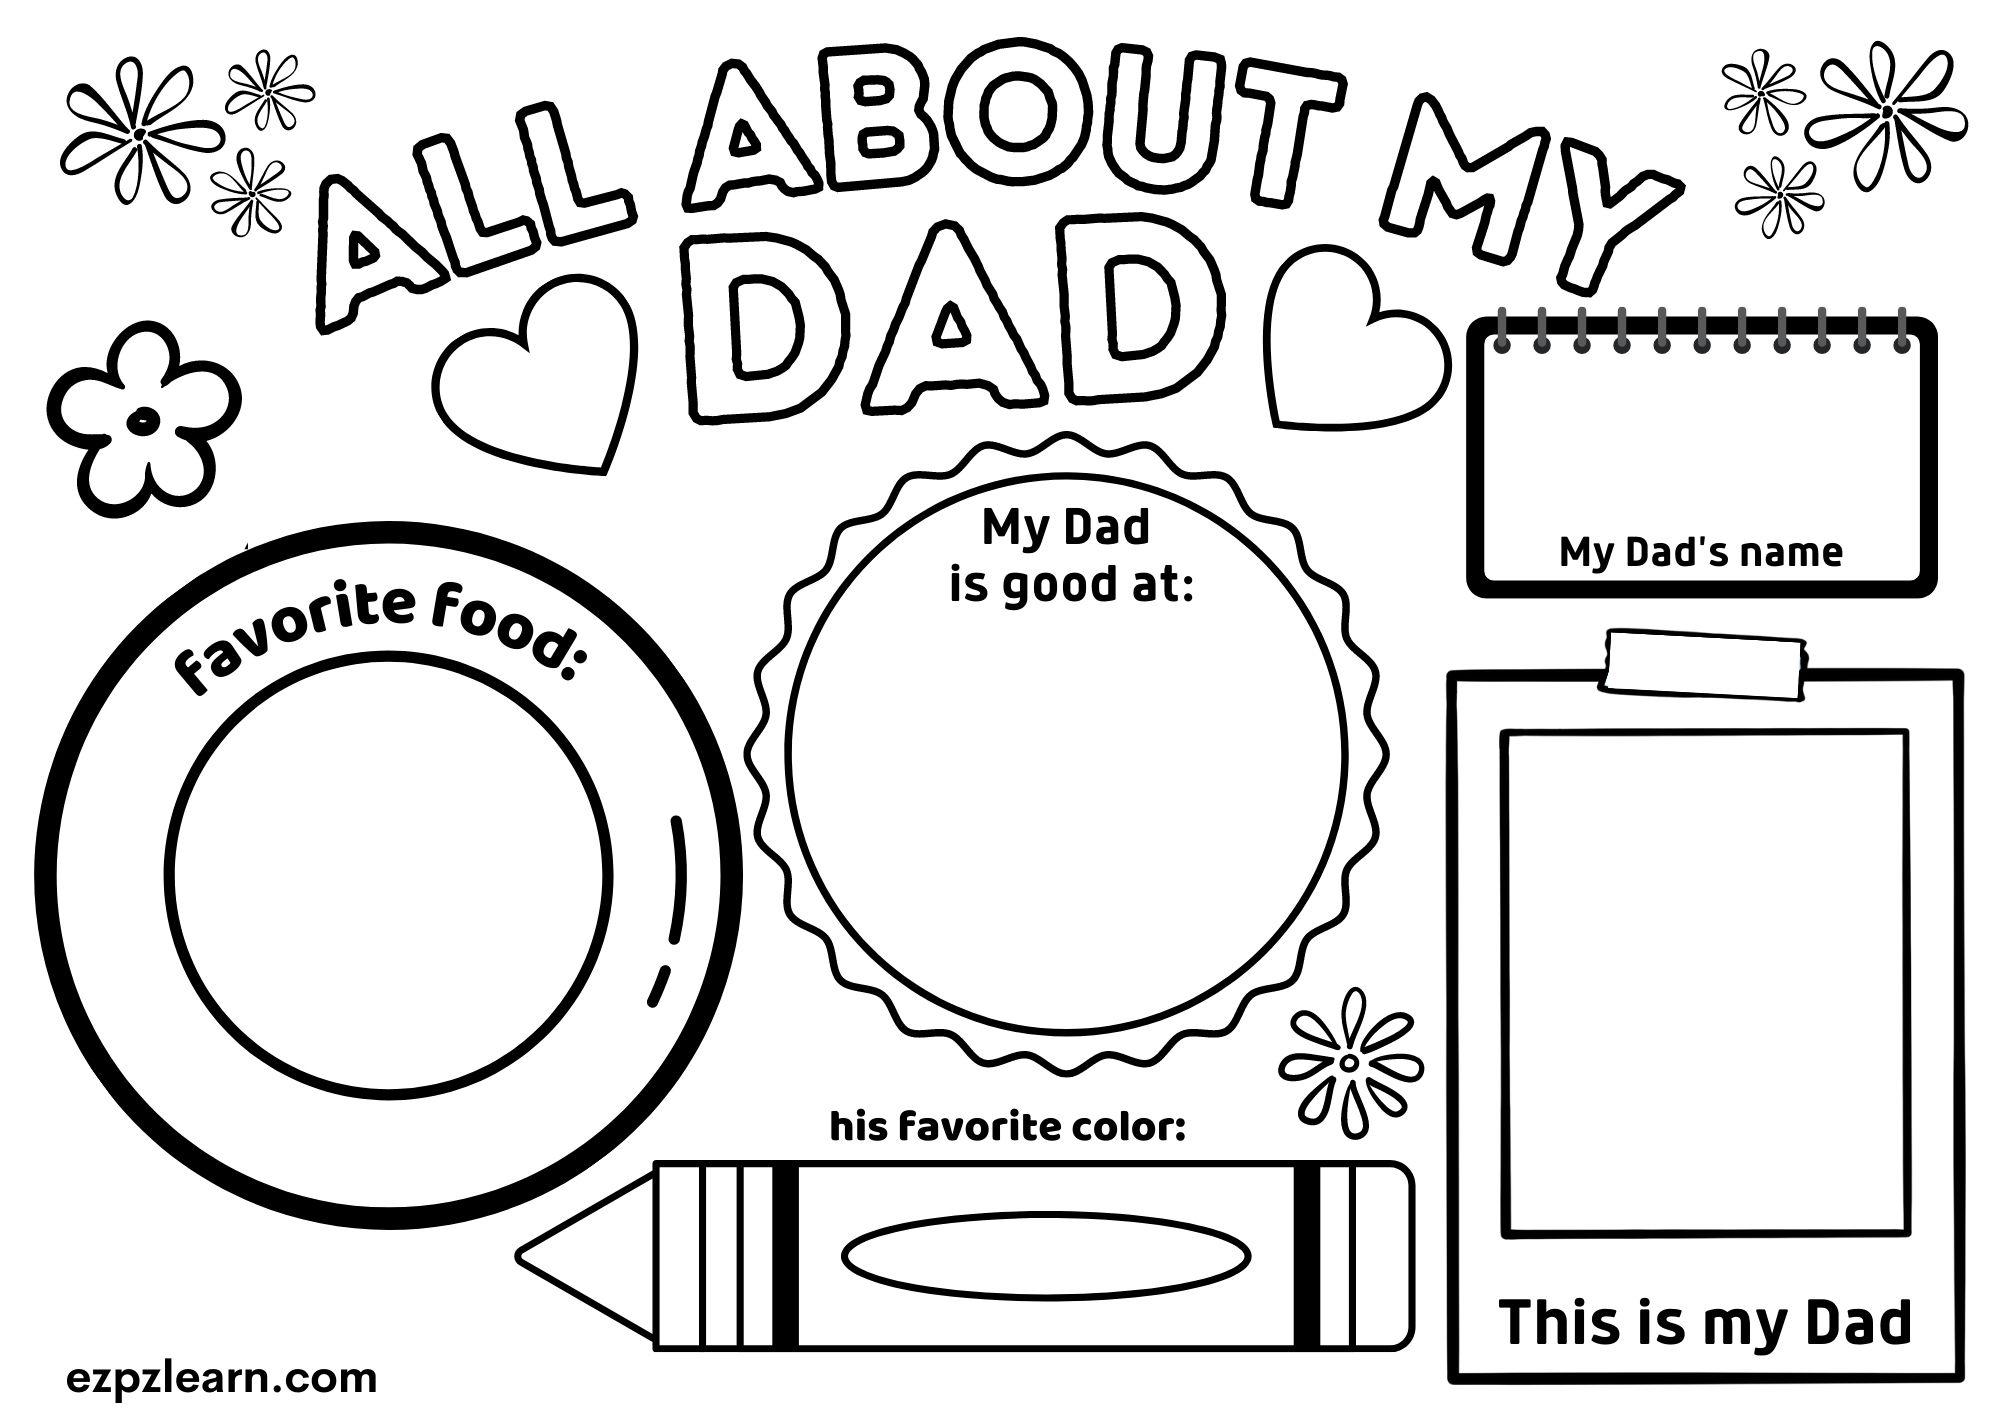 all-about-my-dad-father-s-day-activity-free-pdf-download-ezpzlearn